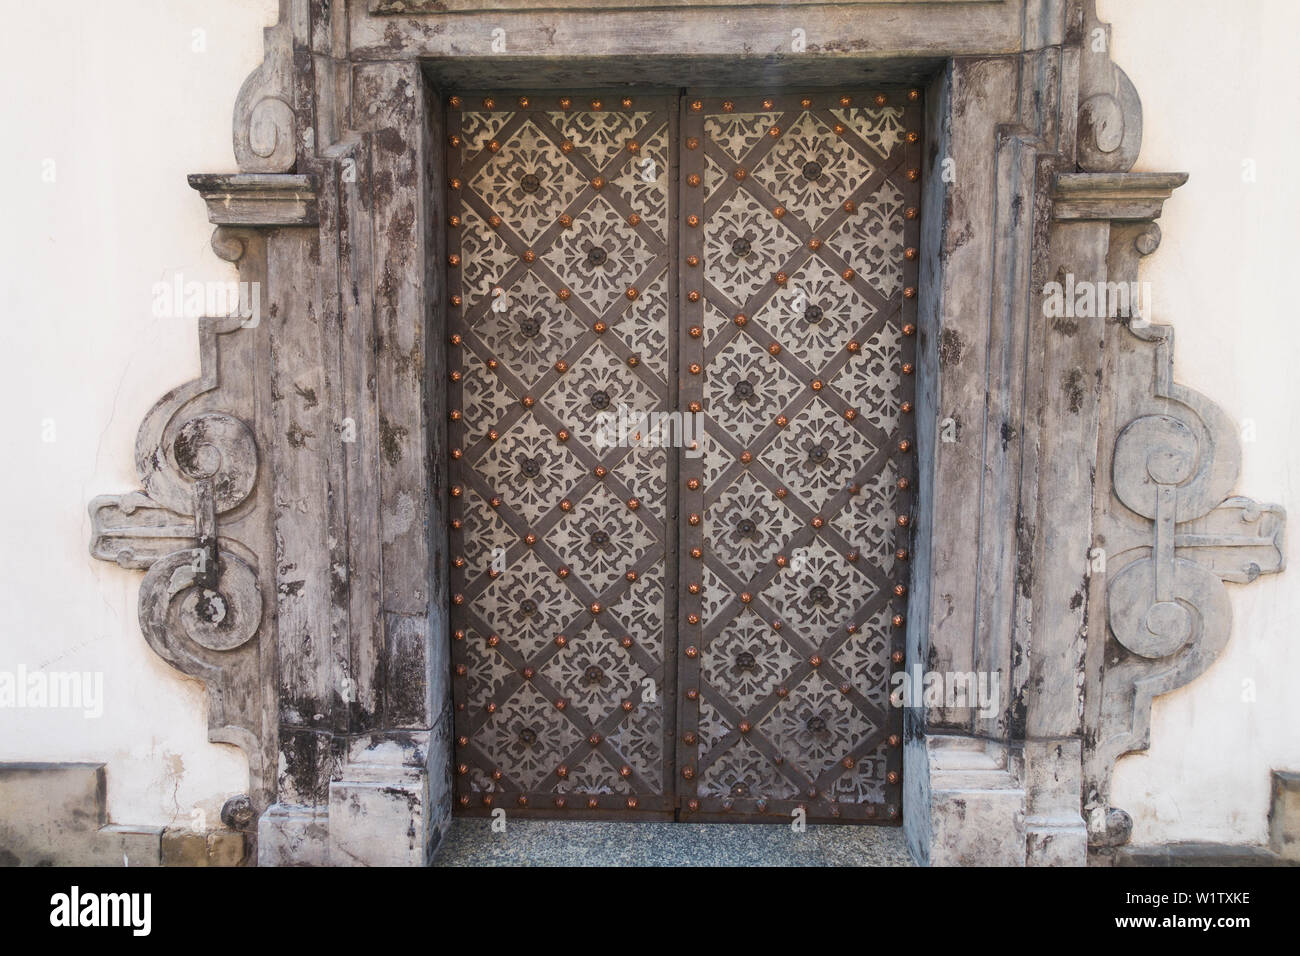 Ancient medieval doors to the Convent of Poor Clares,Krakow,Poland, Europe. Stock Photo